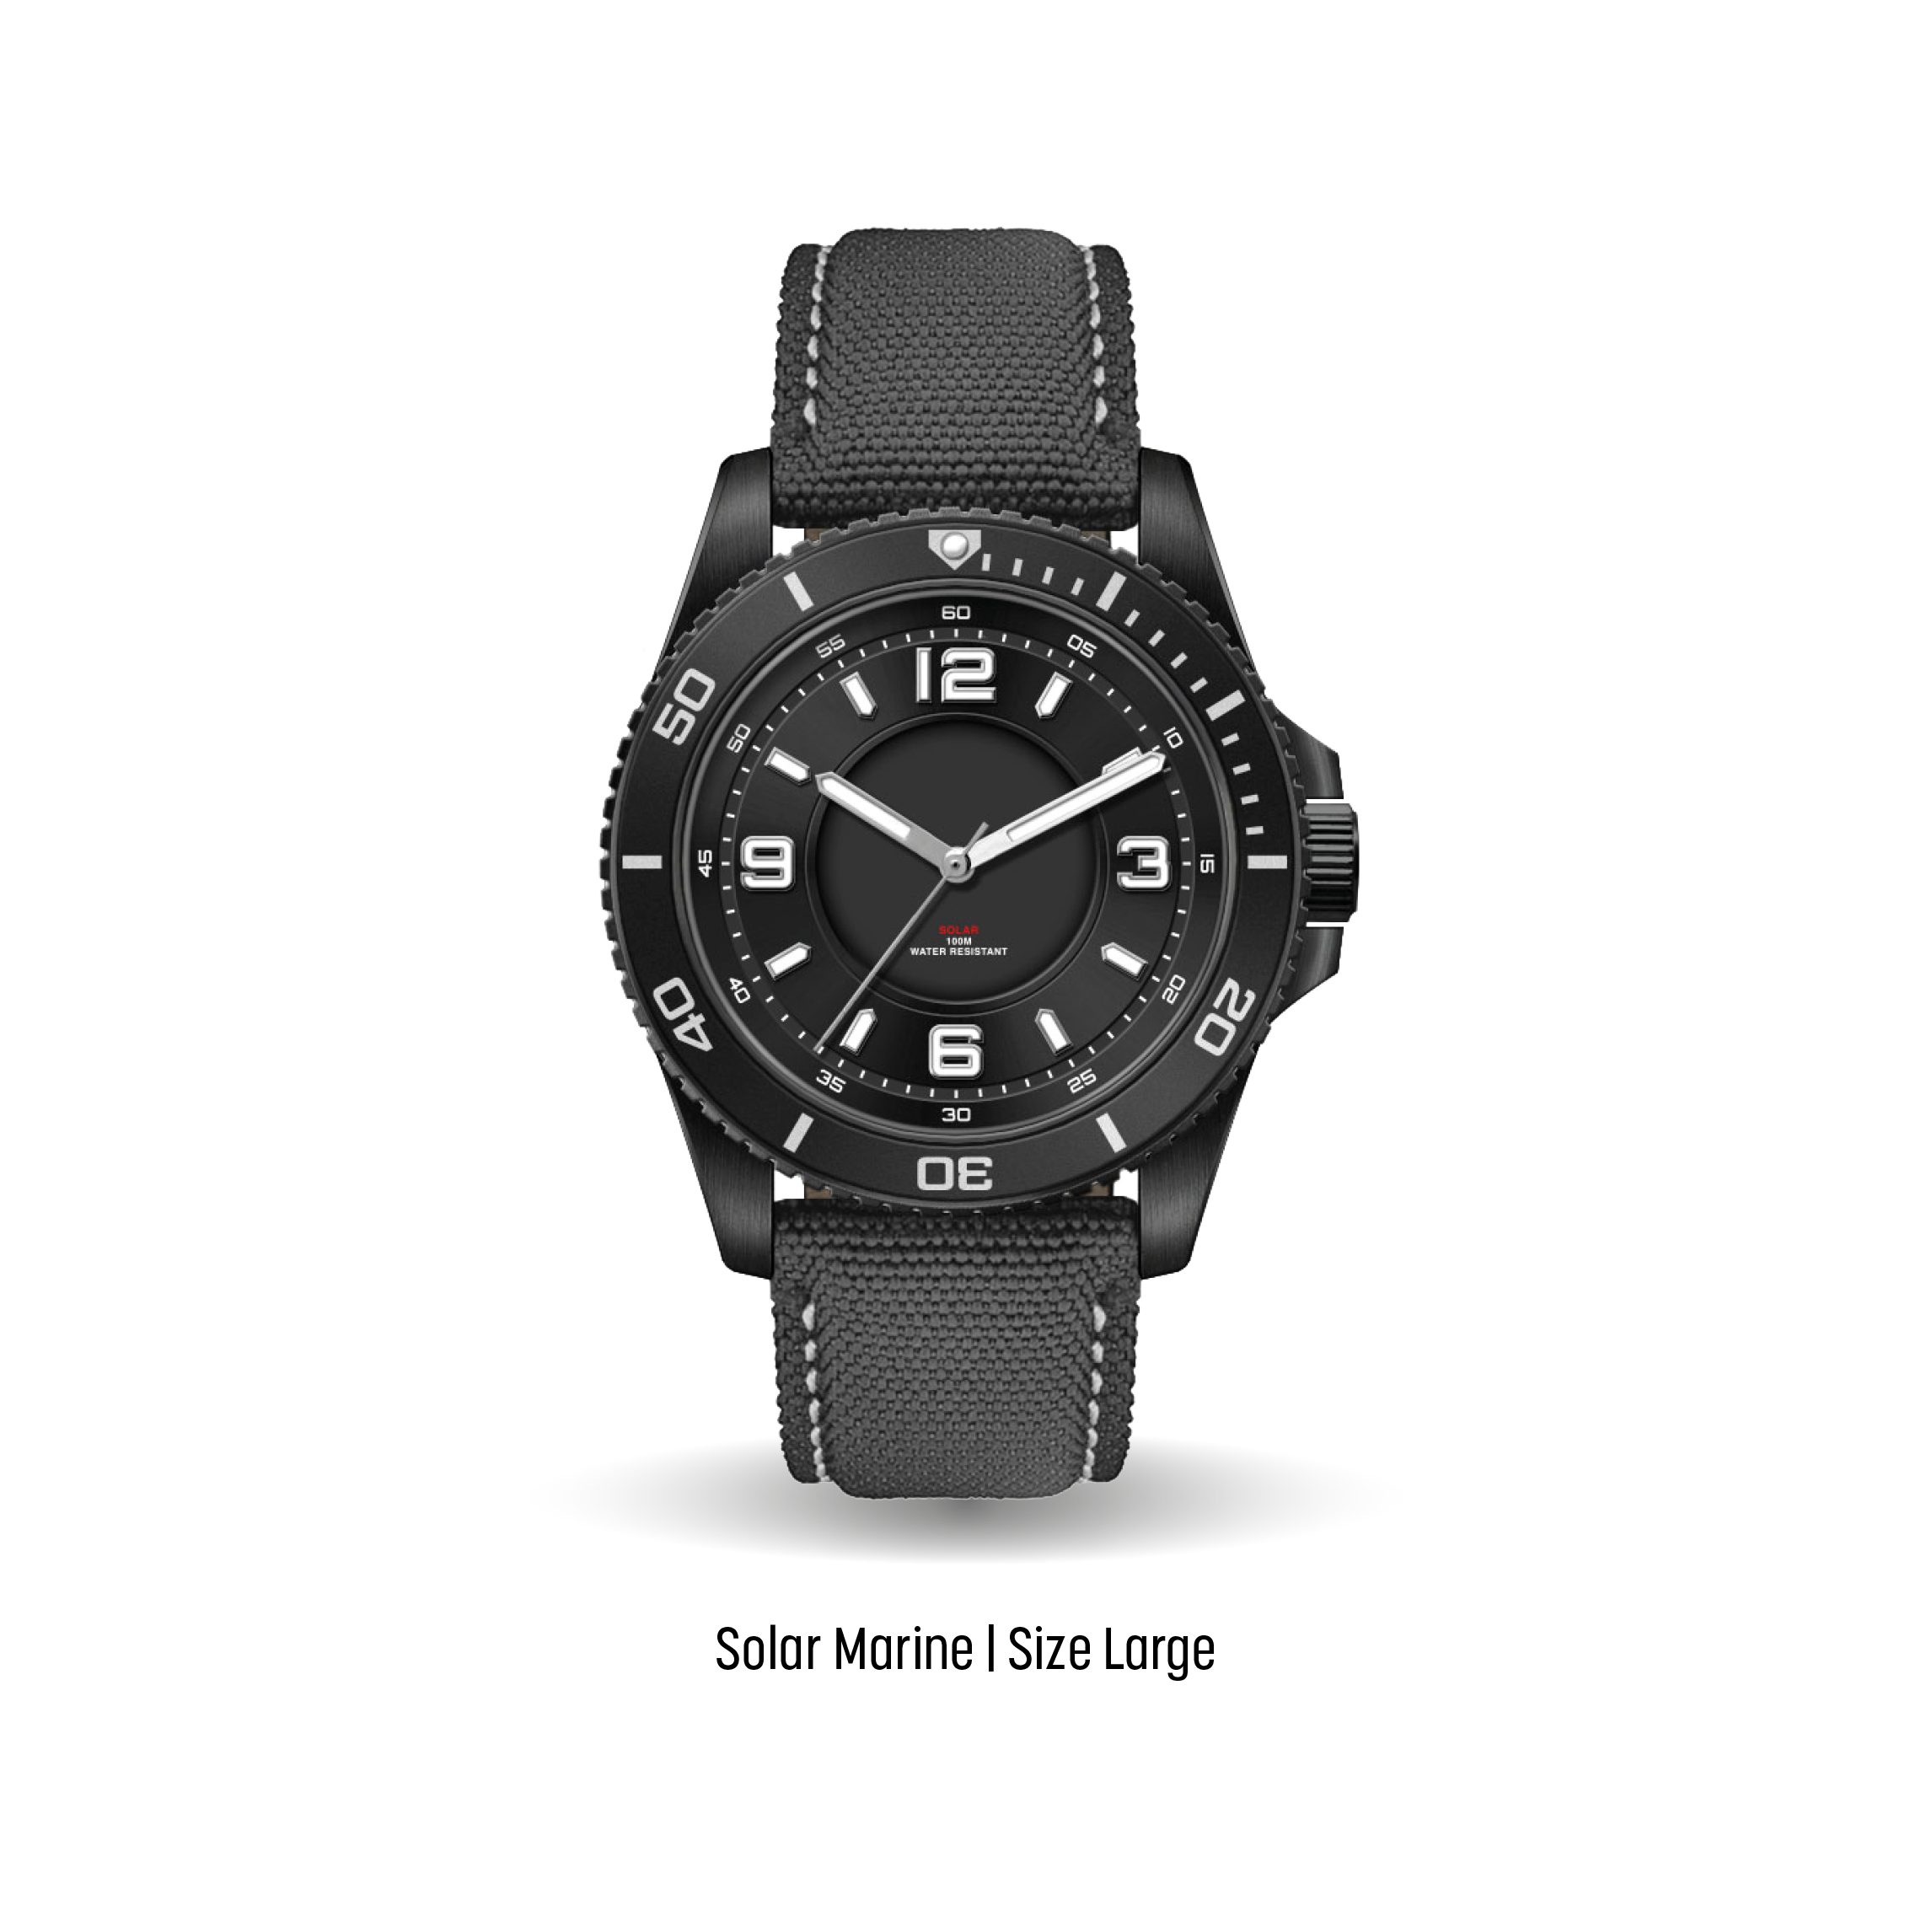 MARINE SOLAR custom tool watches by Watch Branding - With limitless customization. Ideal for commemorating history and more